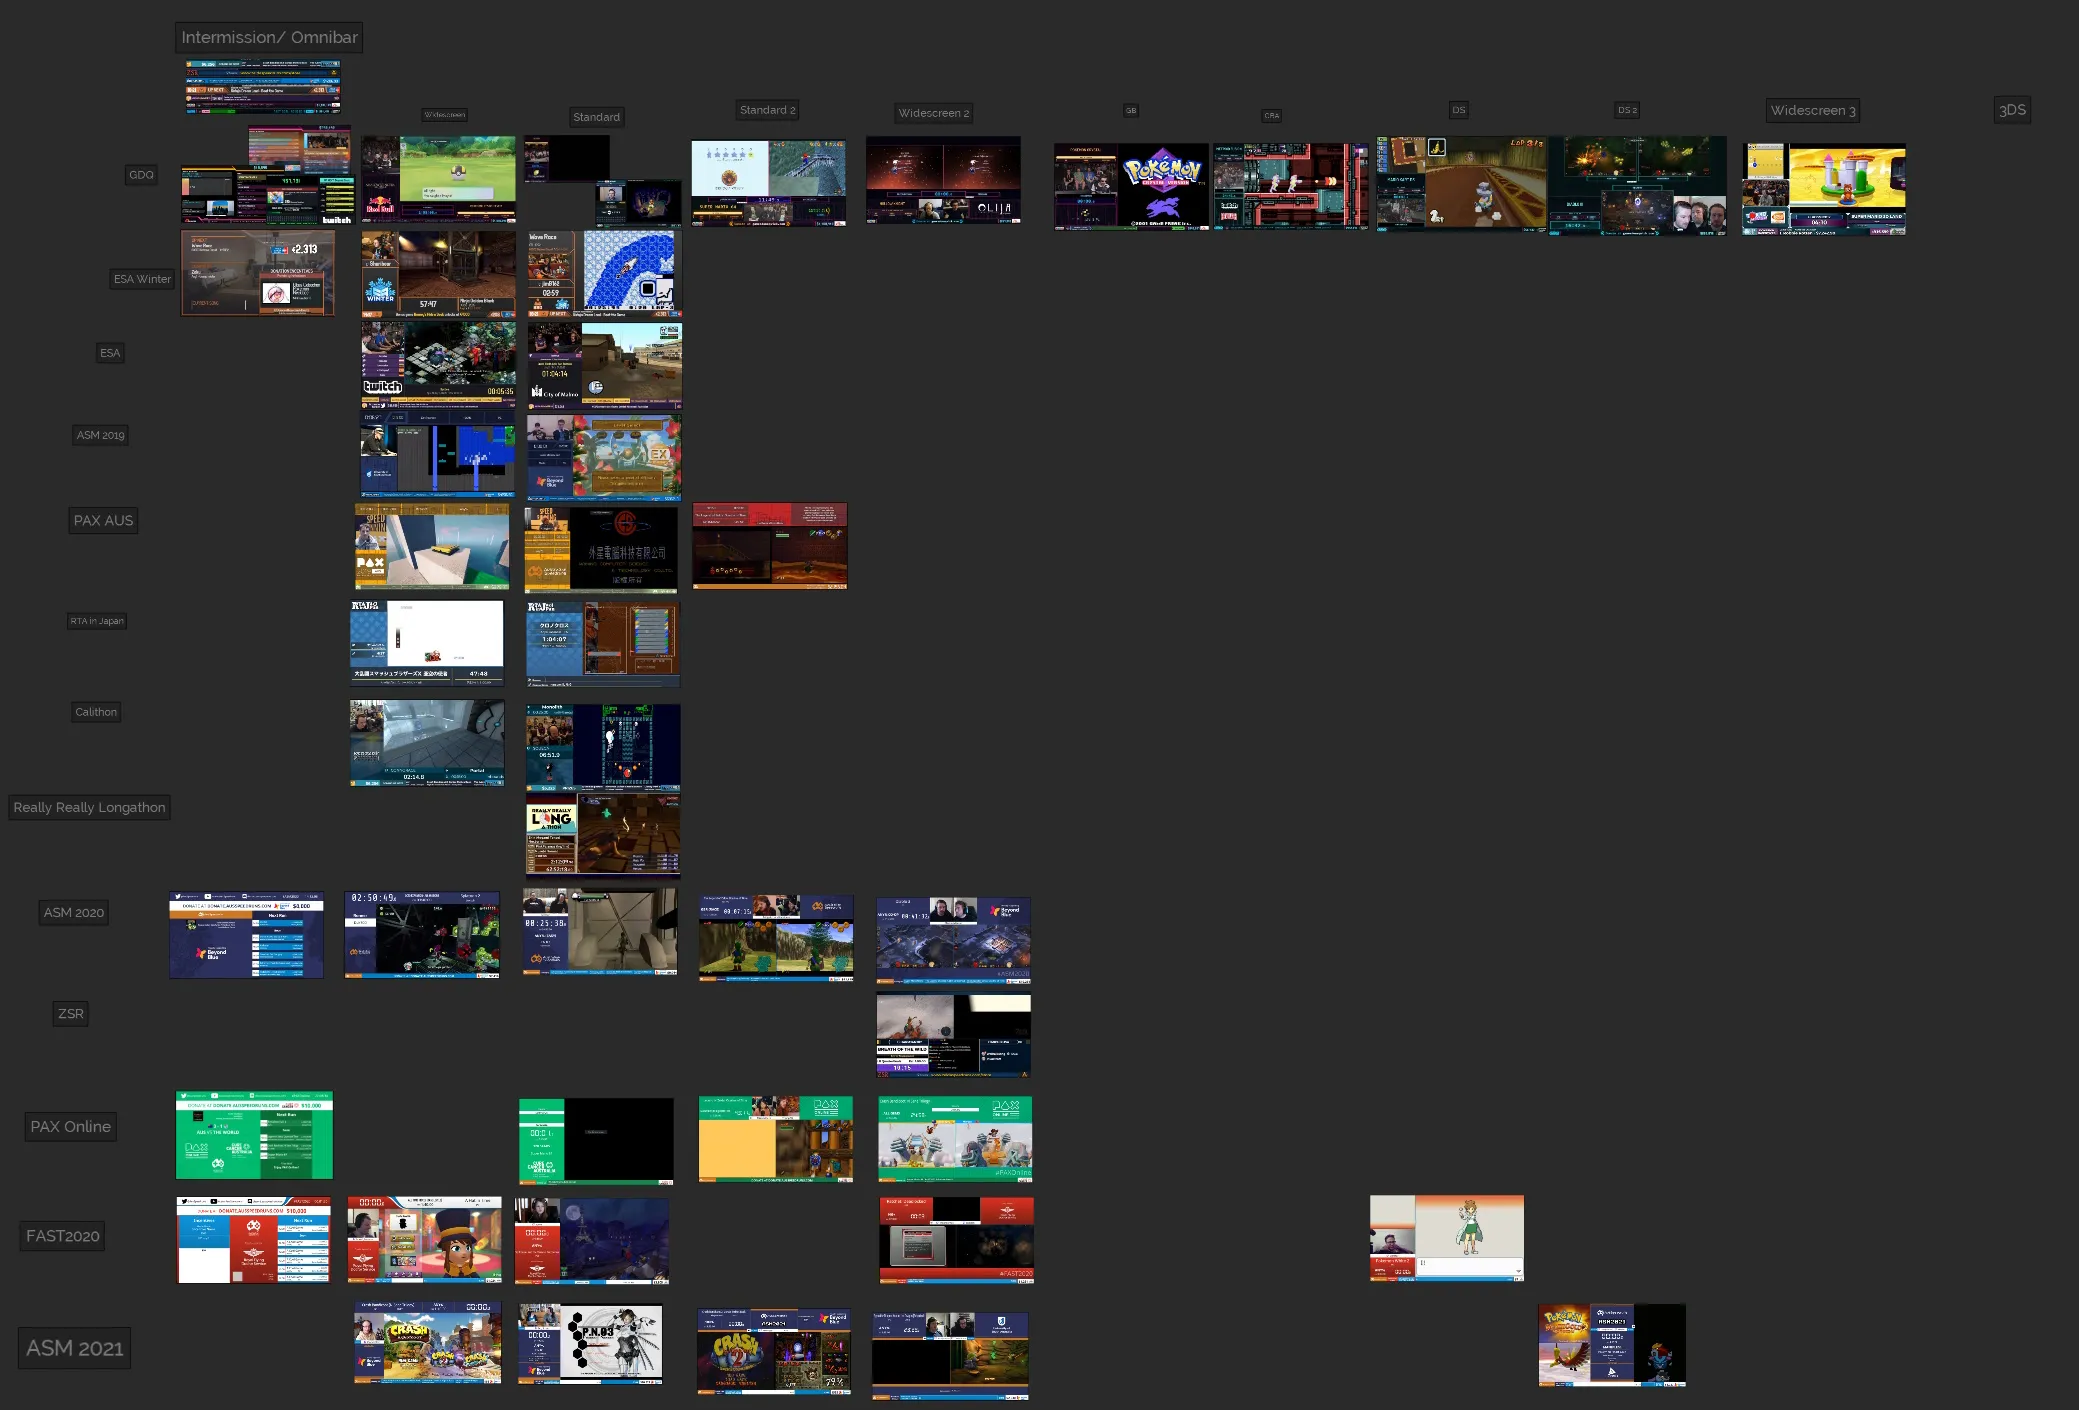 An image taken from PureRef showing a matrix of multiple marathons and their designs for different aspect ratios